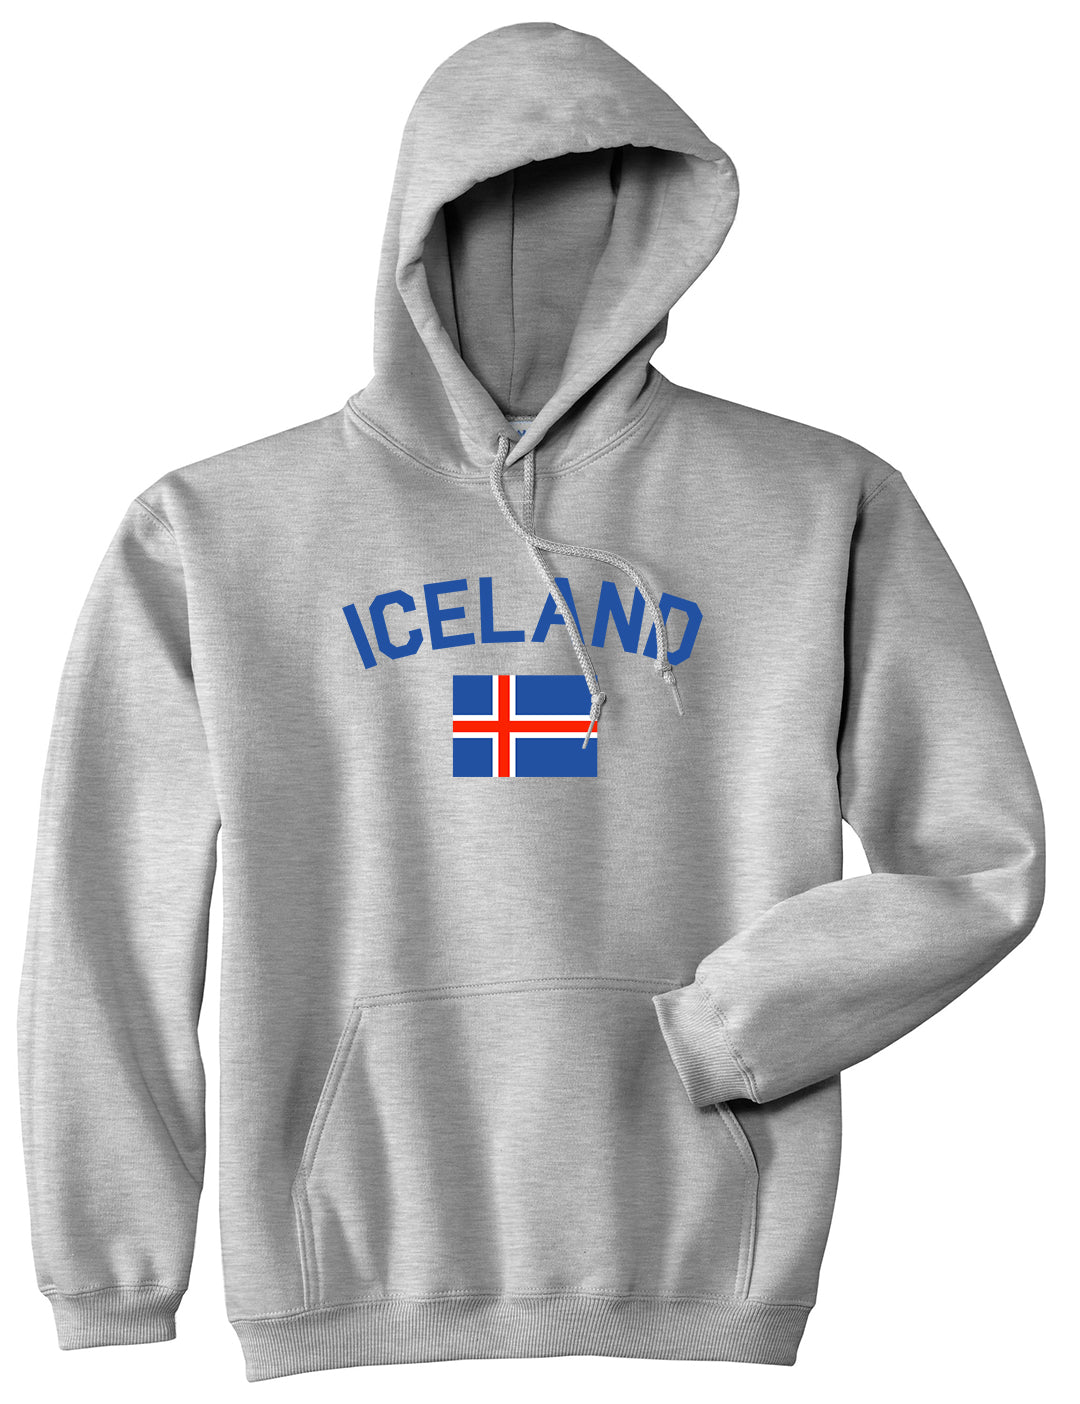 Iceland With Icelandic Flag Souvenir Mens Pullover Hoodie Grey